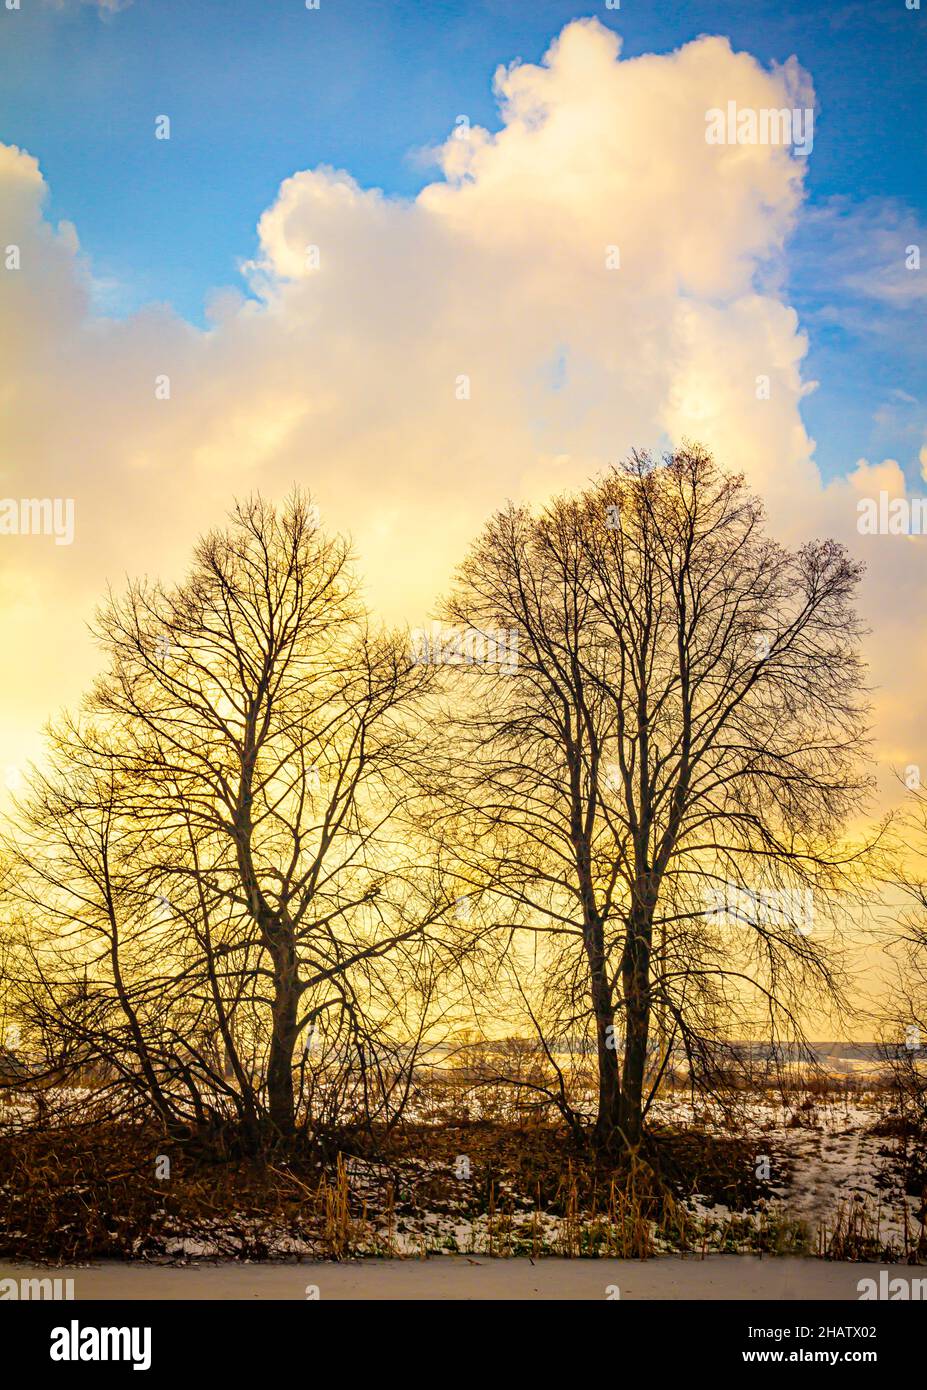 Late fall. Silhouettes of trees that have dropped their foliage on the shore of a pond under a blue sky with cumulus clouds Stock Photo